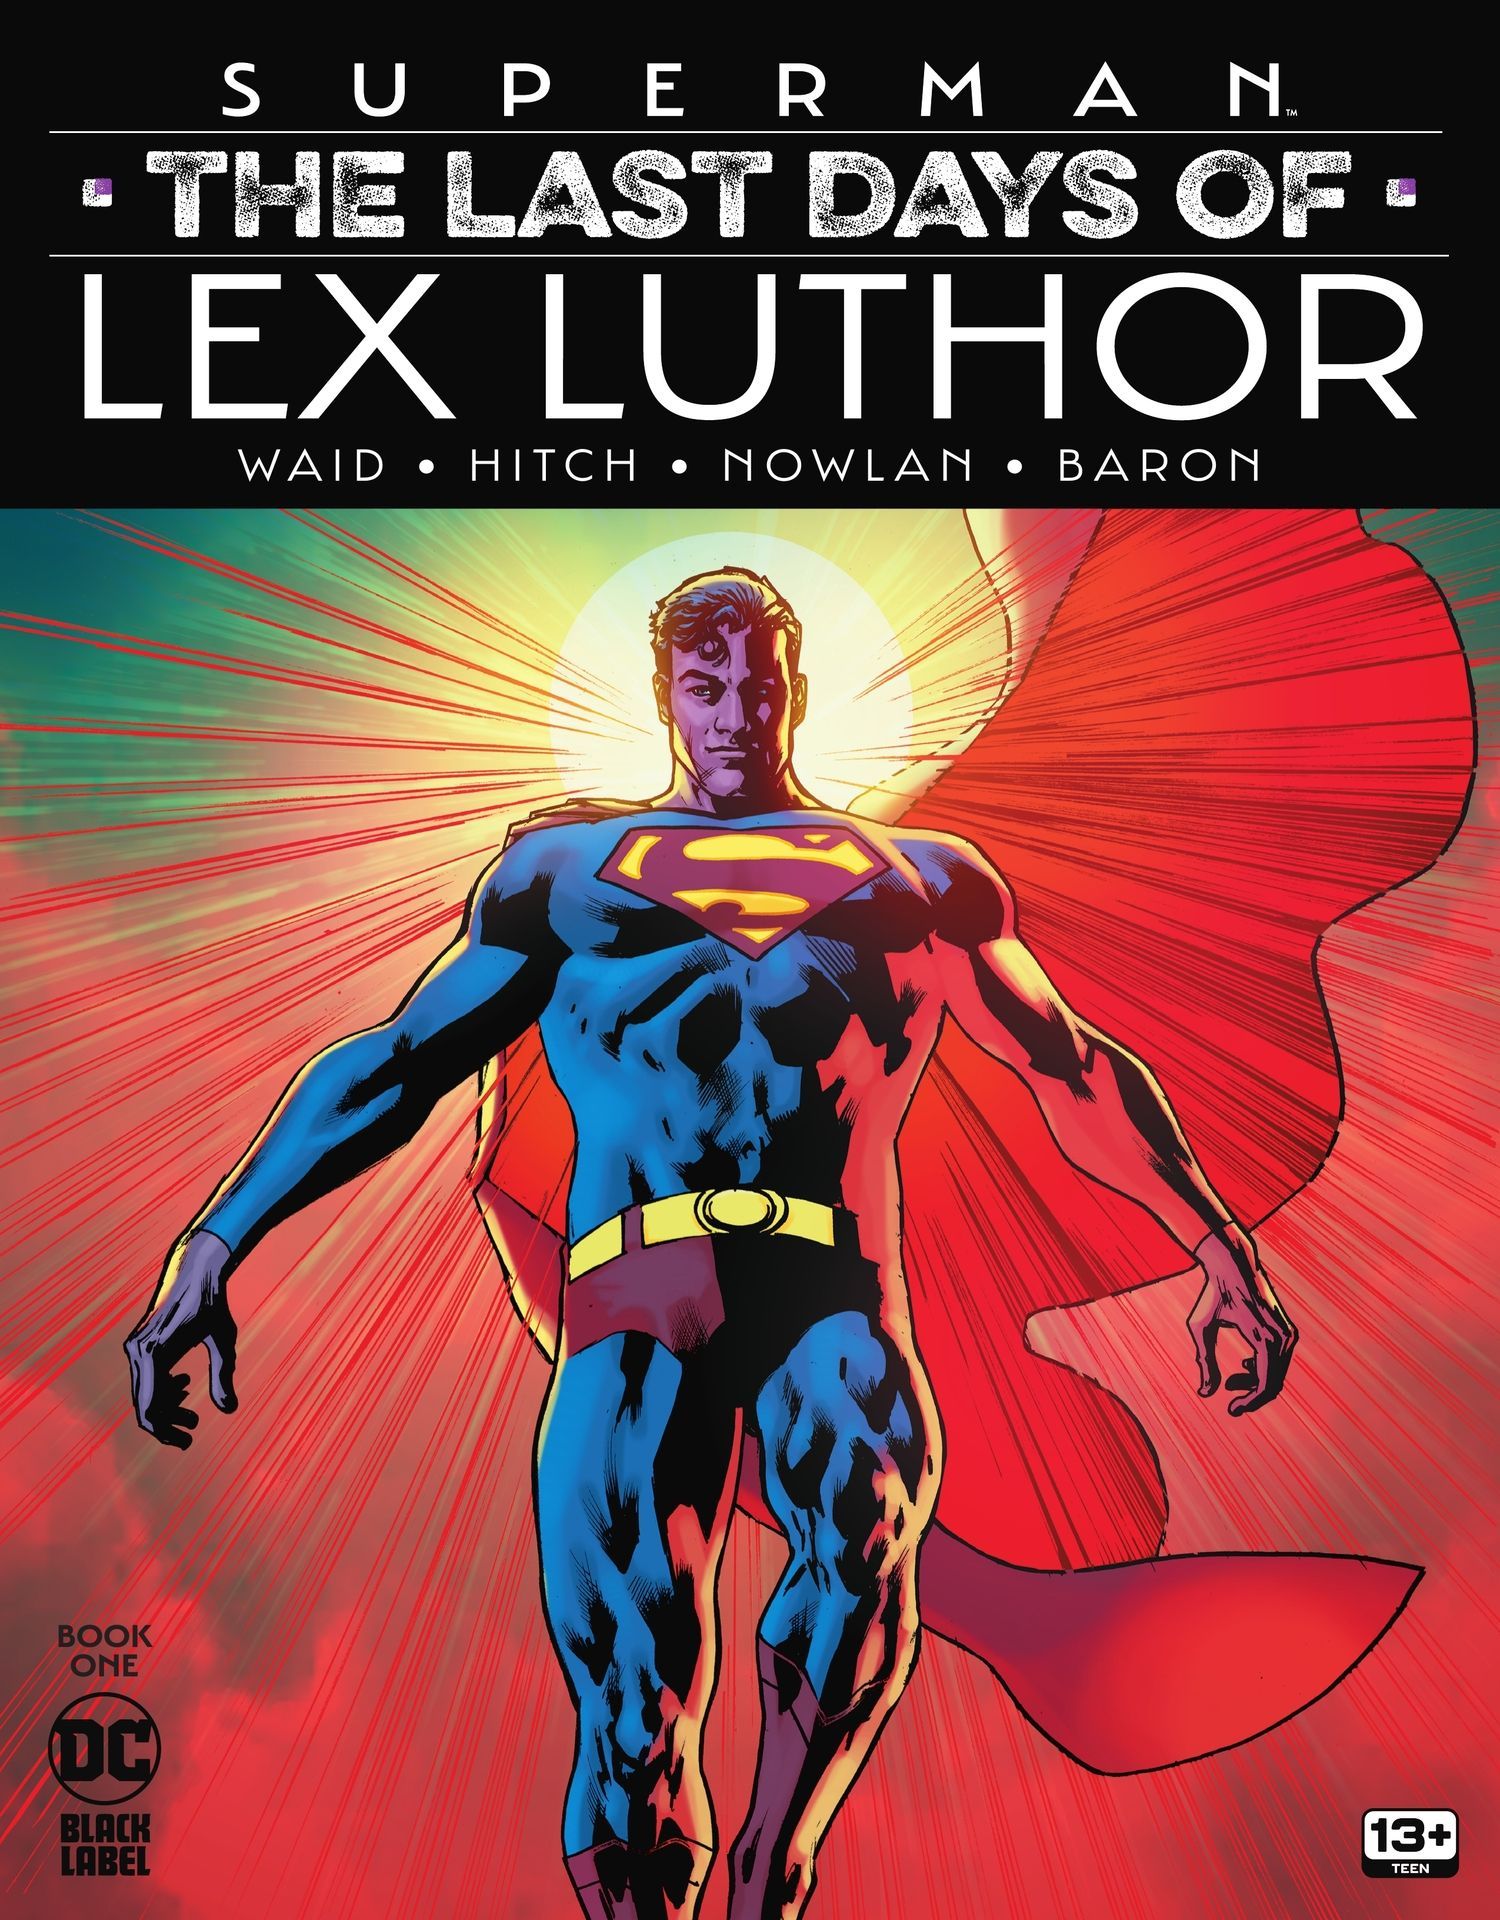 Cover A of Superman The Last Days of Lex Luthor #1